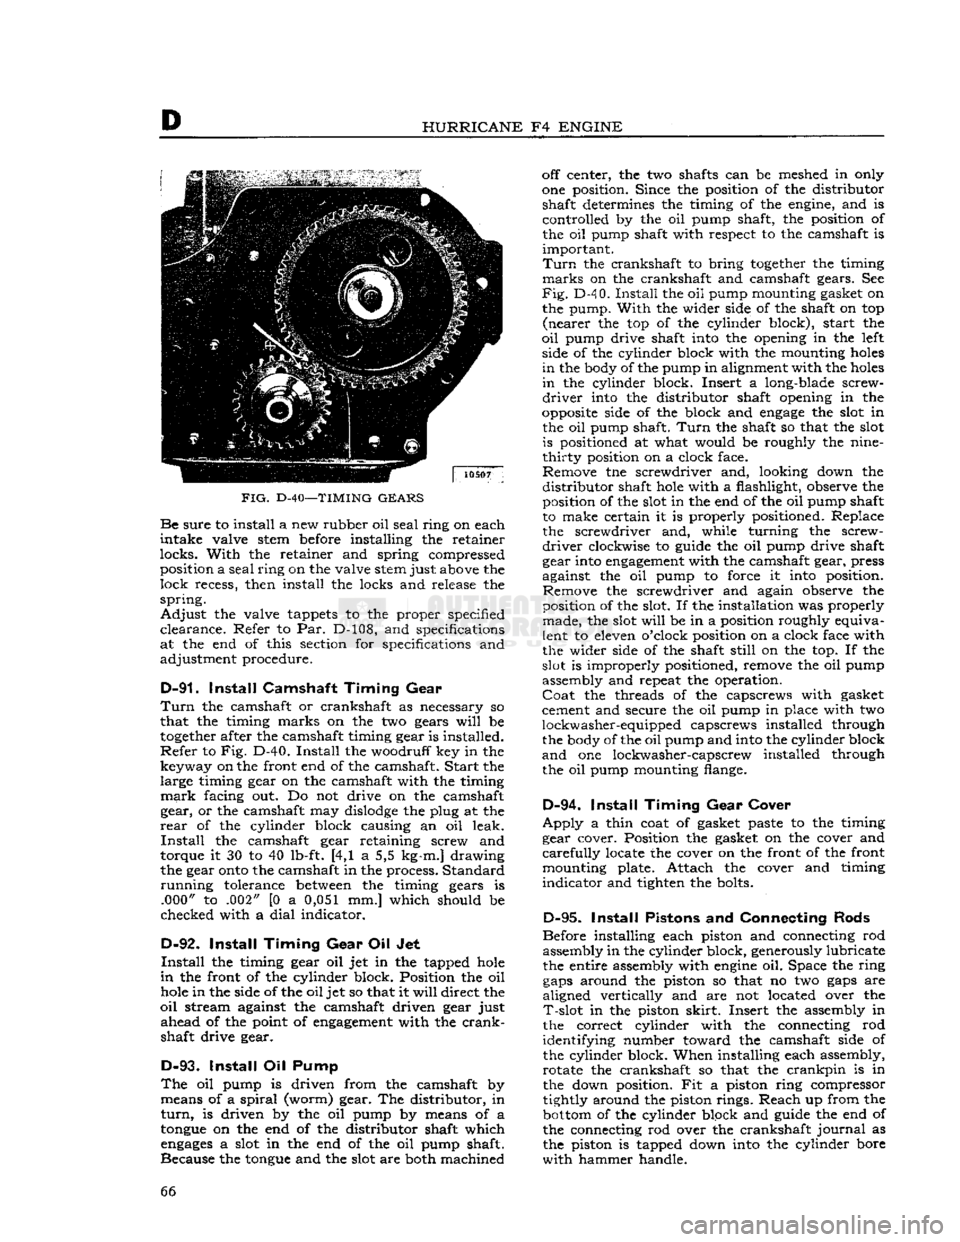 JEEP CJ 1953  Service Manual 
D 

HURRICANE
 F4
 ENGINE 

FIG.
 D-40—TIMING
 GEARS  Be
 sure
 to install a new rubber oil
 seal
 ring on each 

intake
 valve stem before installing the retainer 

locks.
 With
 the retainer and 